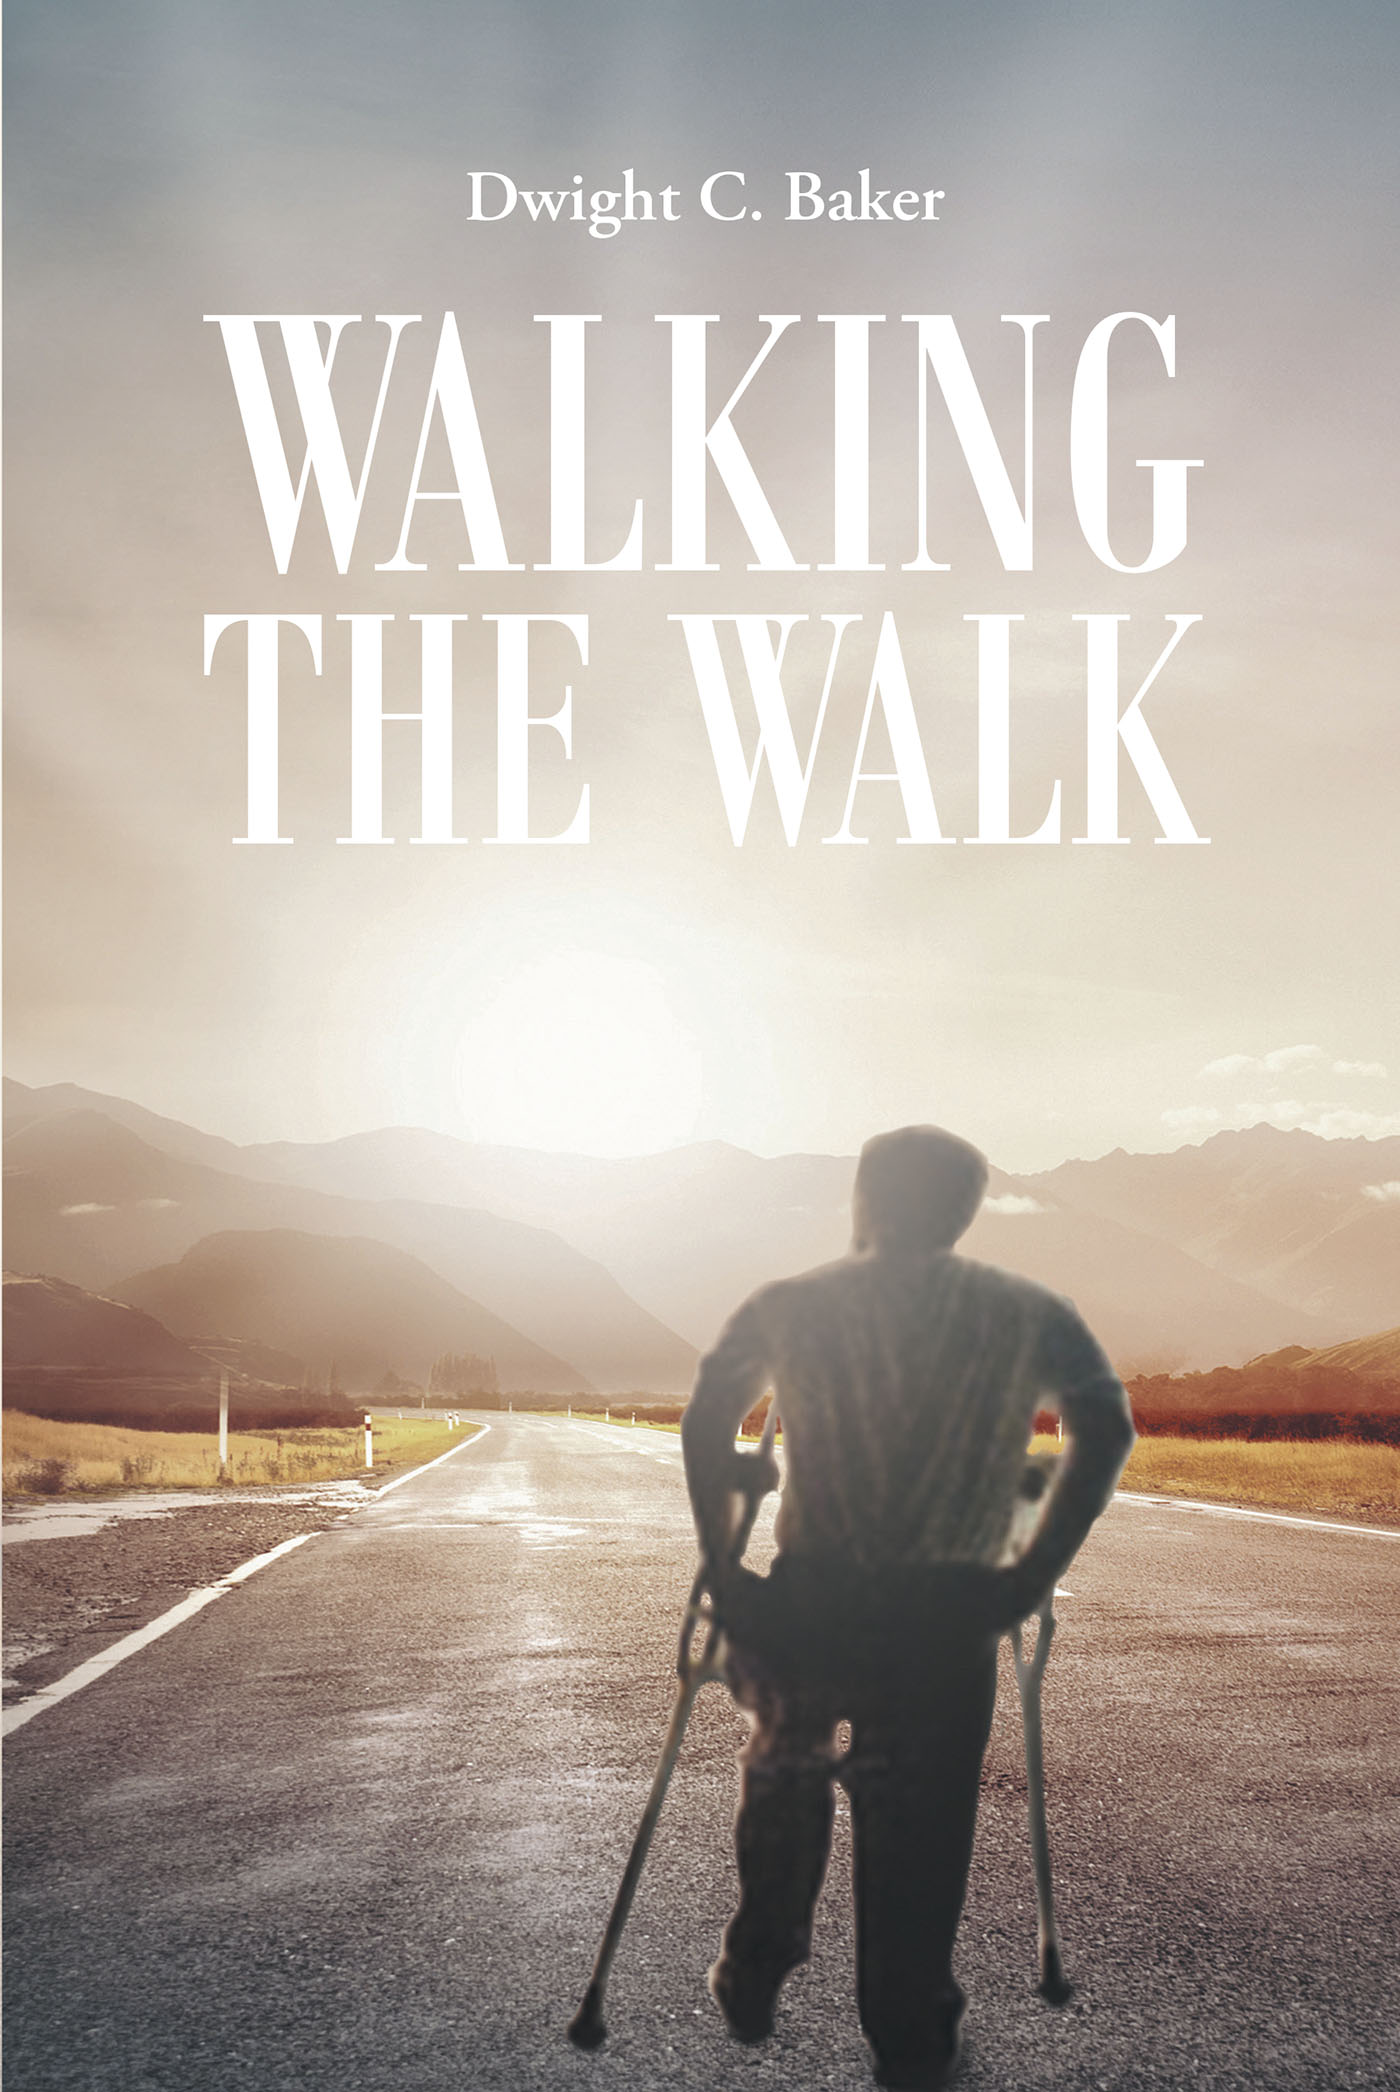 Author Dwight C. Baker's New Book 'Walking the Walk' is a Captivating ...